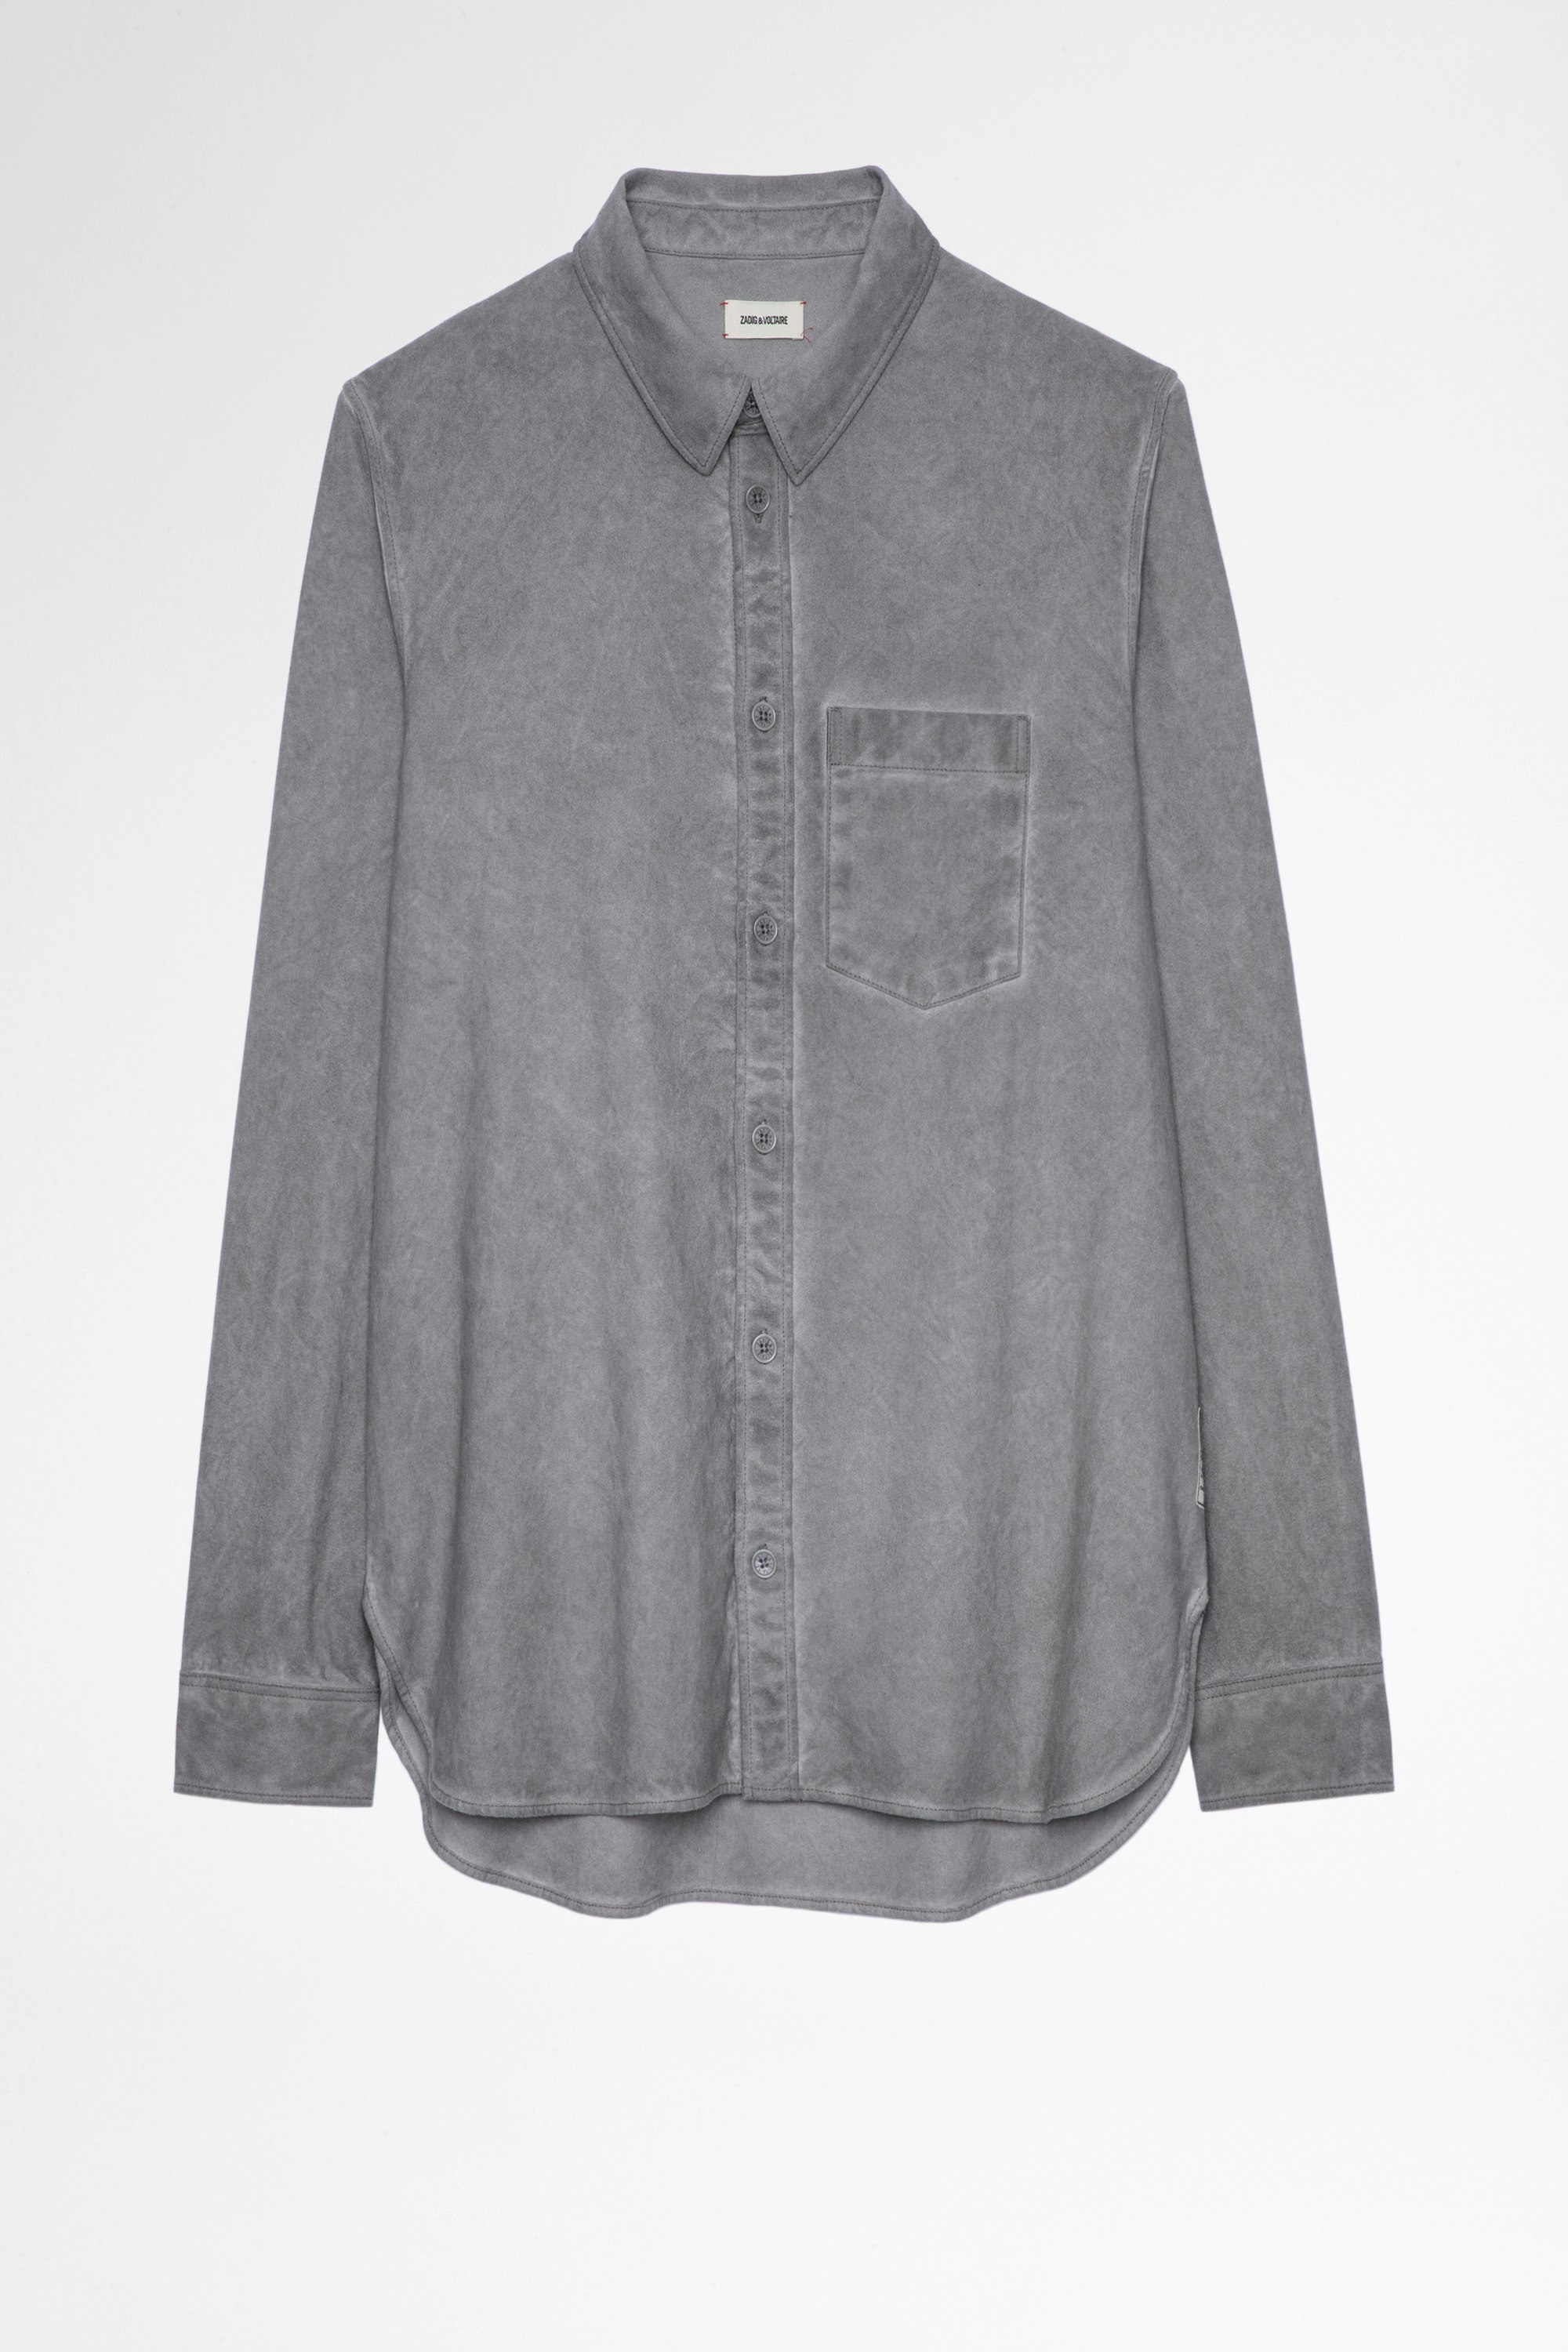 Serge Mili Shirt Men's gray cotton shirt with embroidered skull